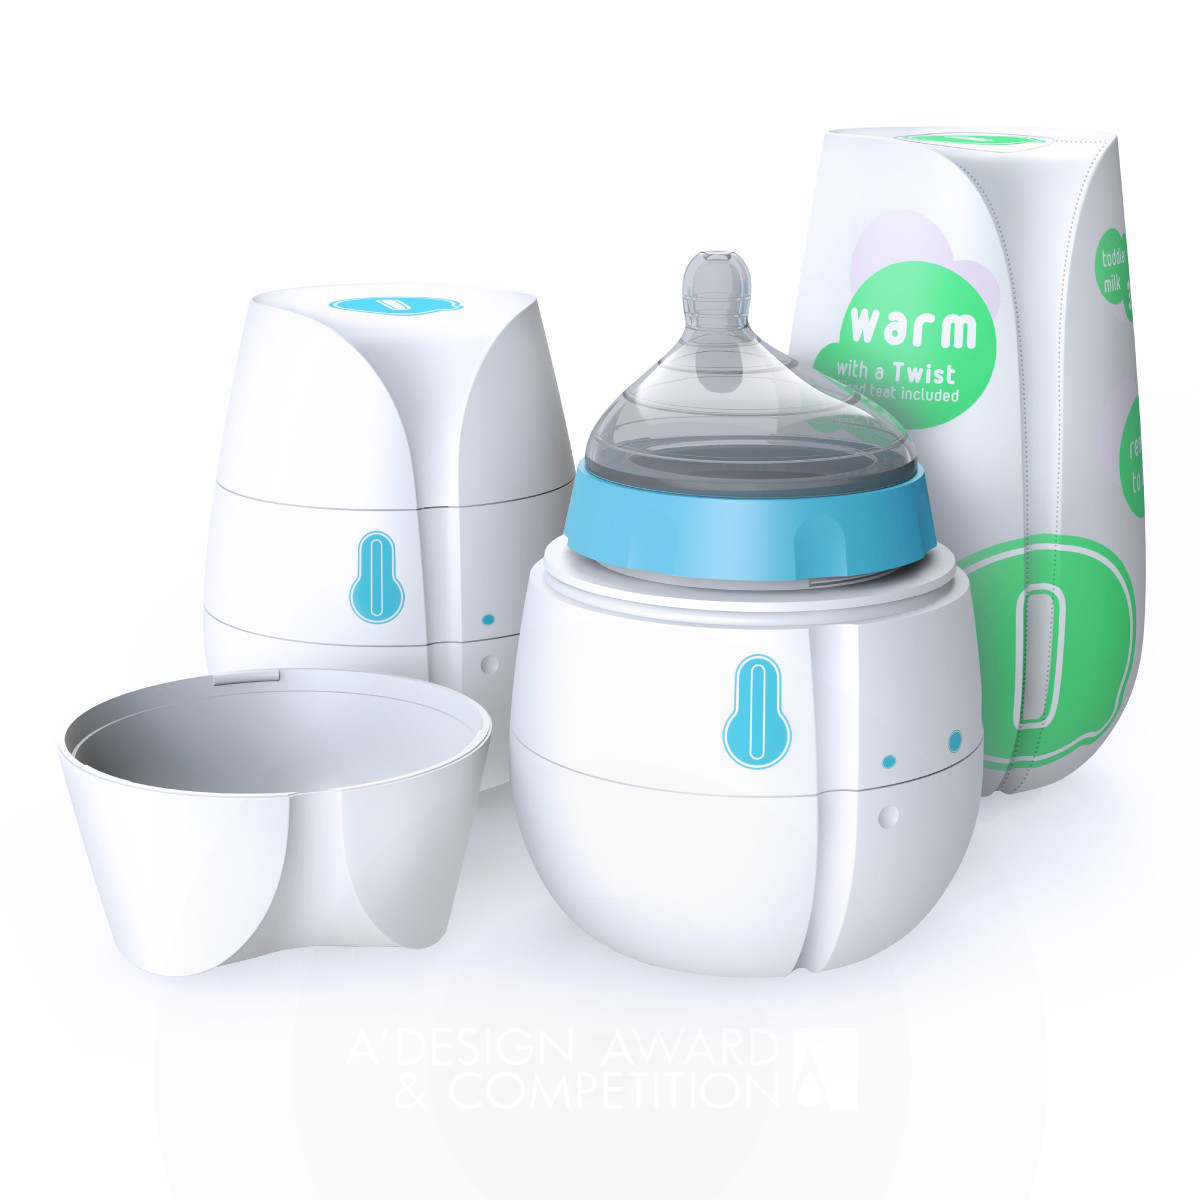 Qi, pronounced 'Chi' Disposable Self-Heating Baby Bottle by HJC Design